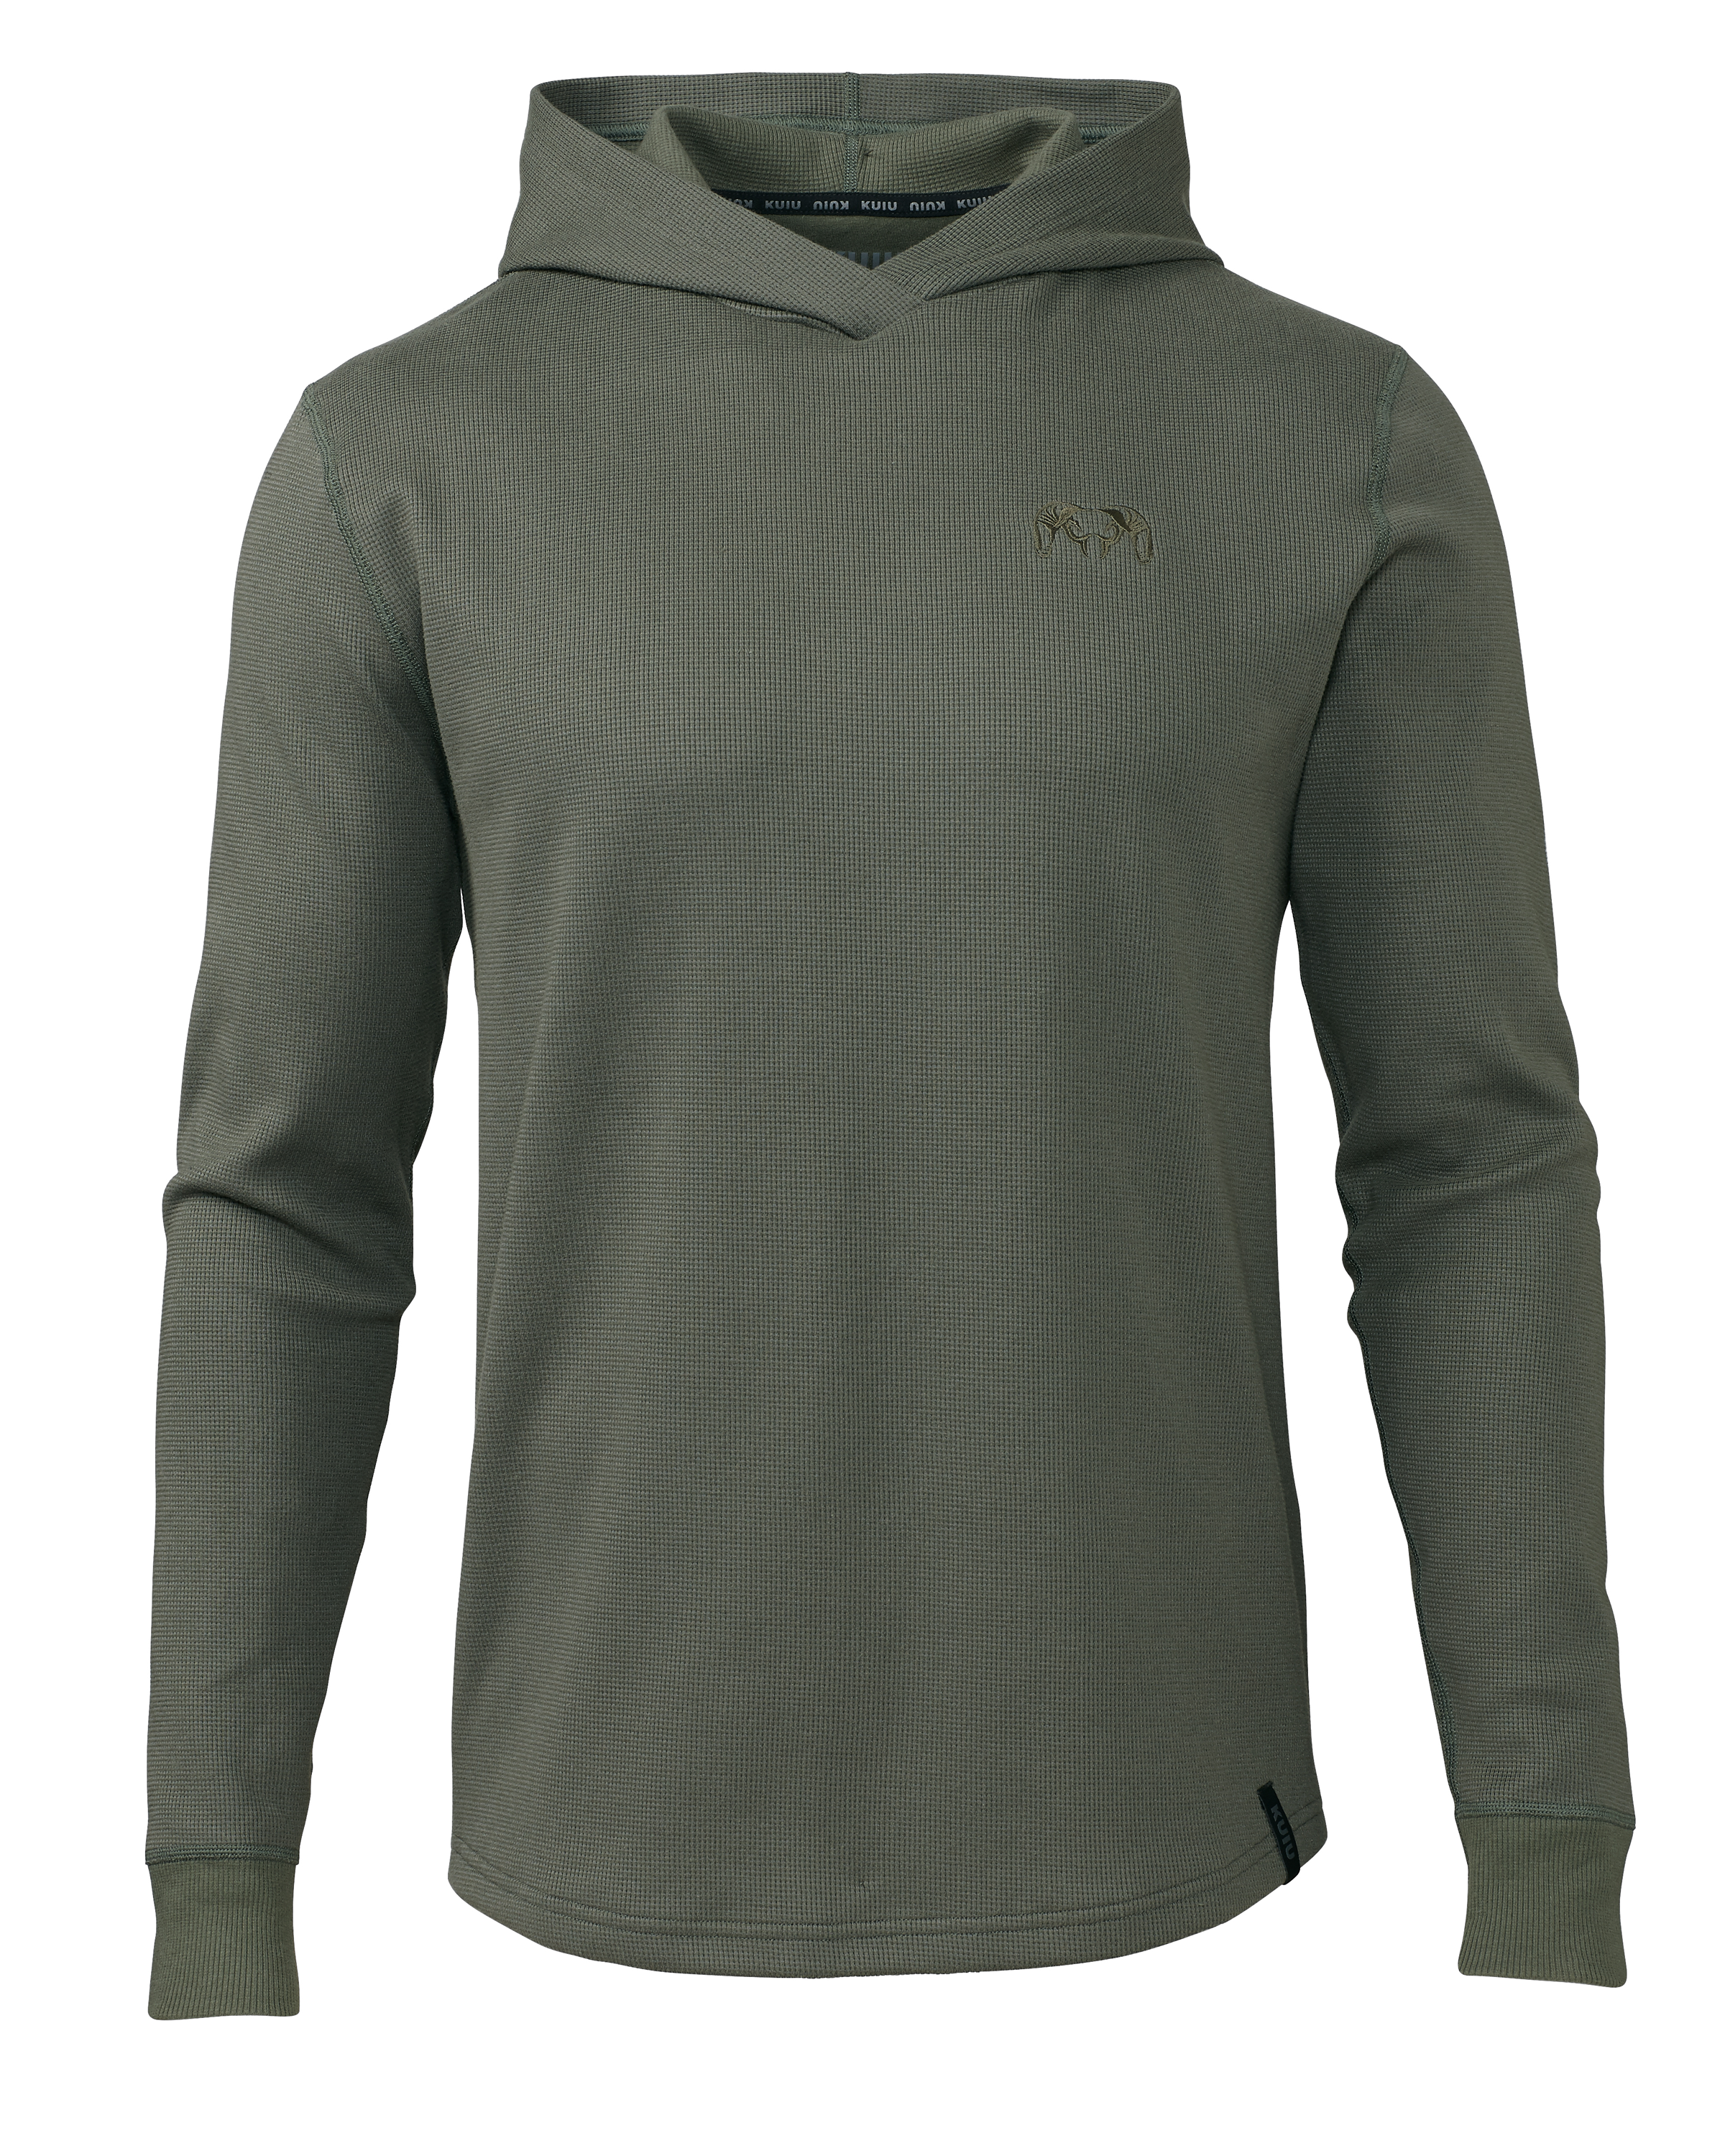 KUIU Outlet Base Camp Waffle Knit Hooded T-Shirt in Olive | Size 3XL